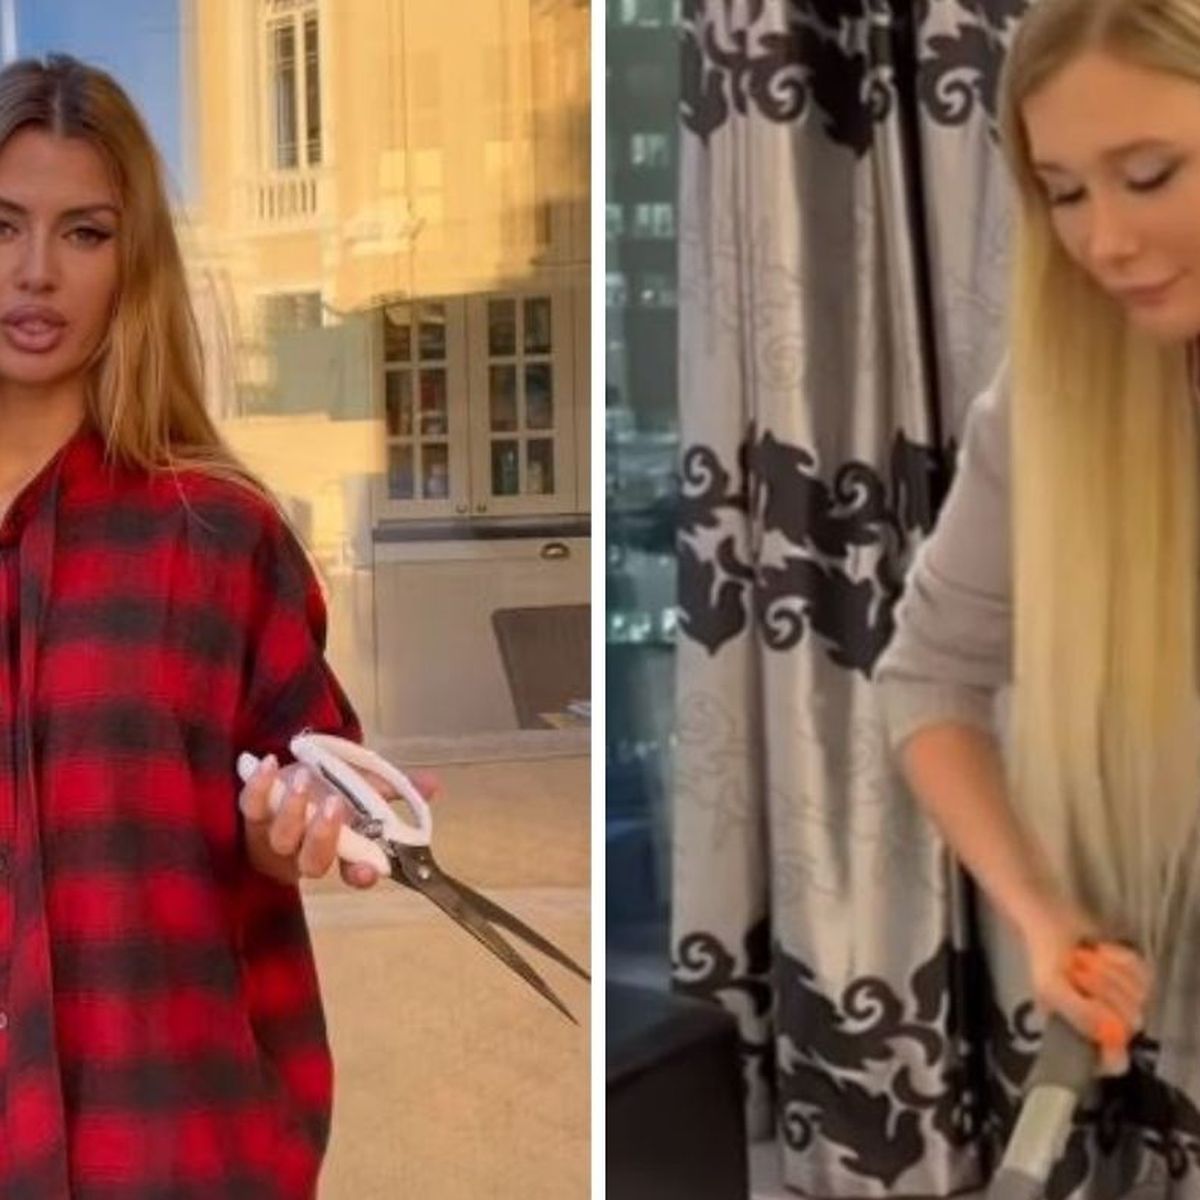 Russian influencers are cutting up Chanel handbags on Instagram